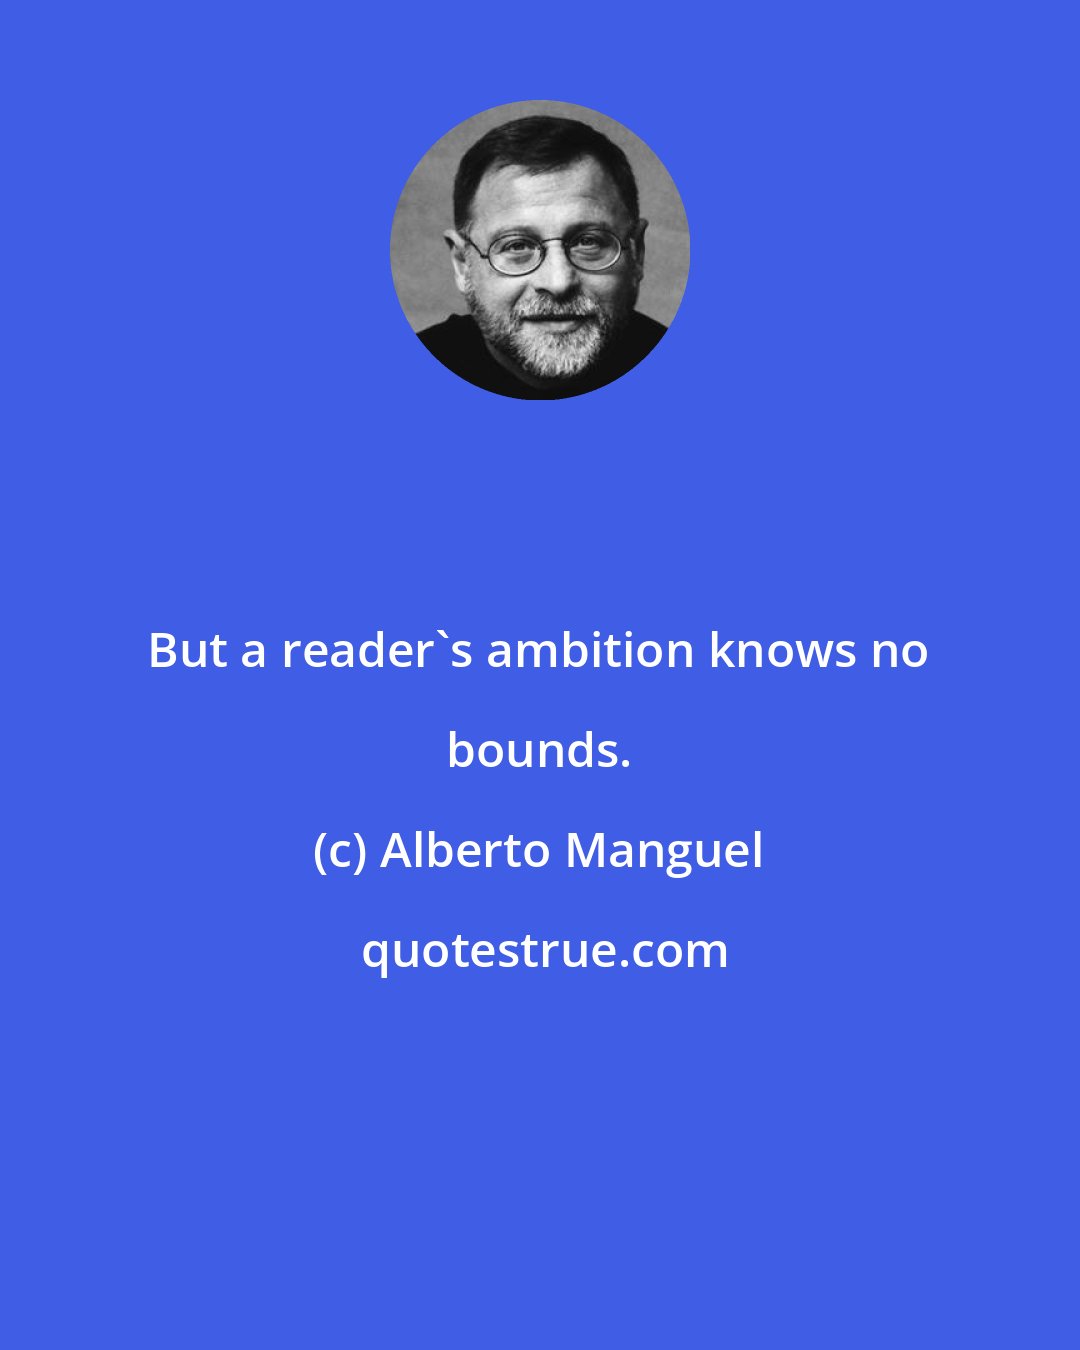 Alberto Manguel: But a reader's ambition knows no bounds.